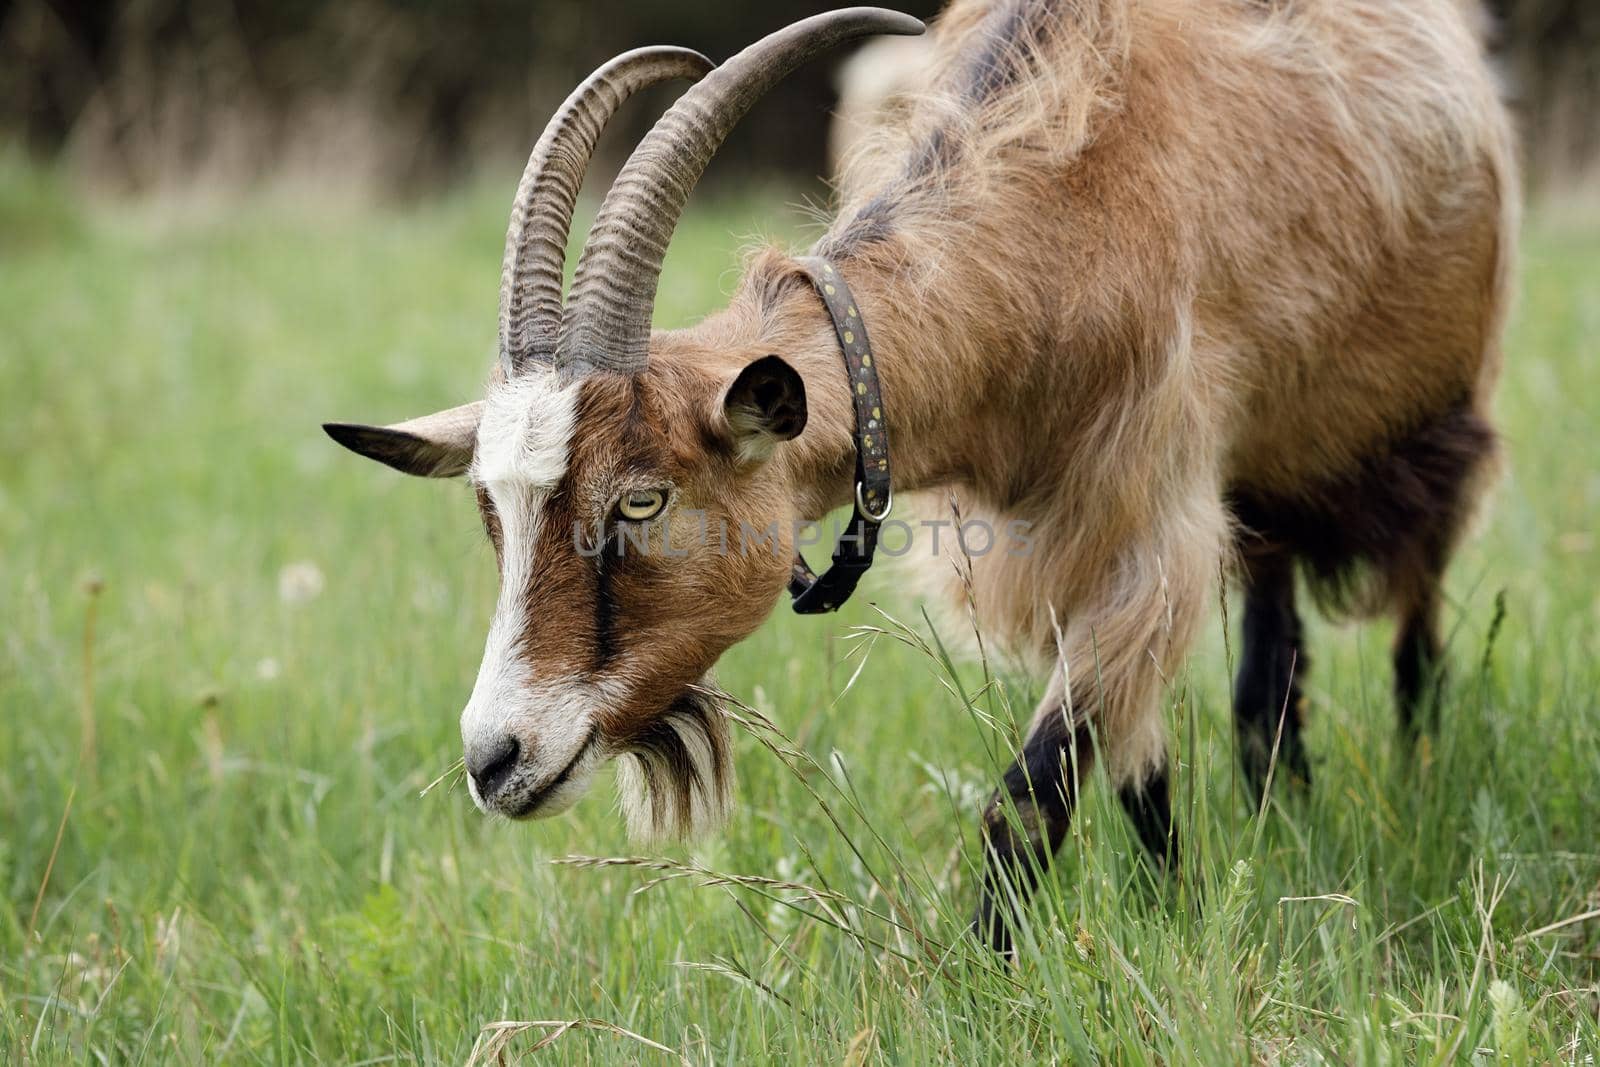 Close-up portrait of brown goat with long curved horns by Lincikas